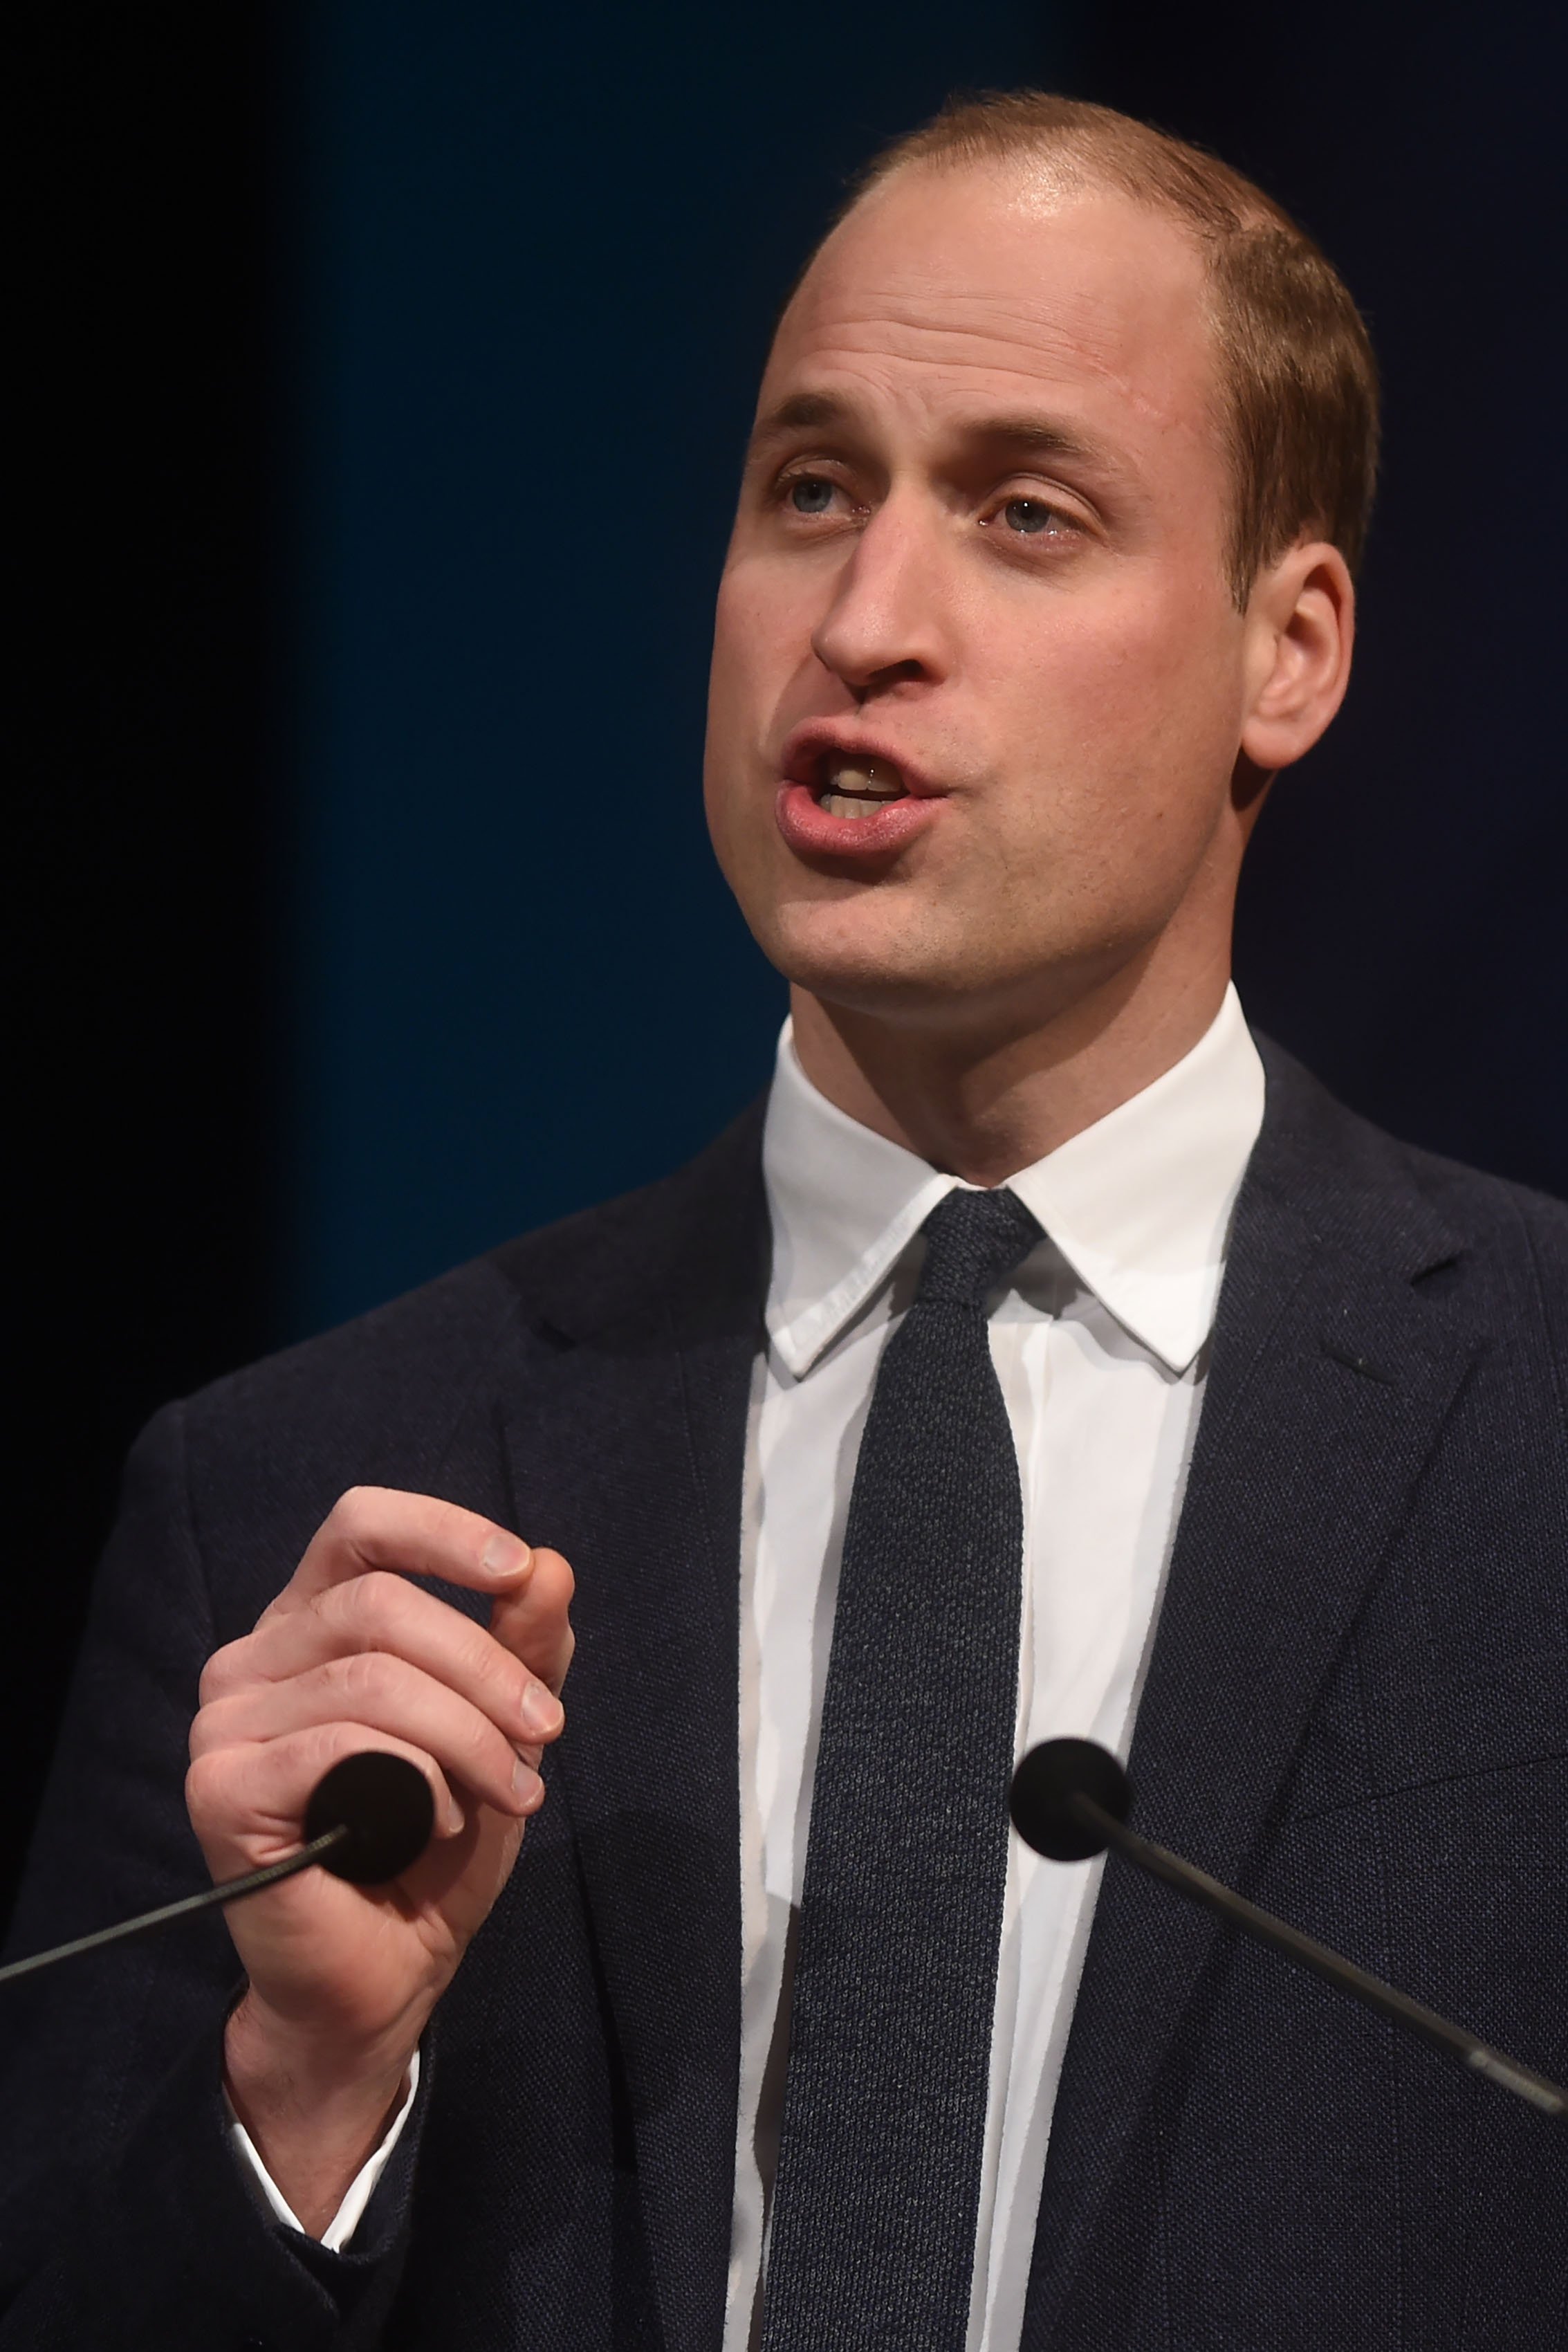 Prince William pictured giving the keynote address at the Children's Global Media Summit at the Manchester Central Convention Complex on December 6, 2017 in Manchester, England. / Source: Getty Images